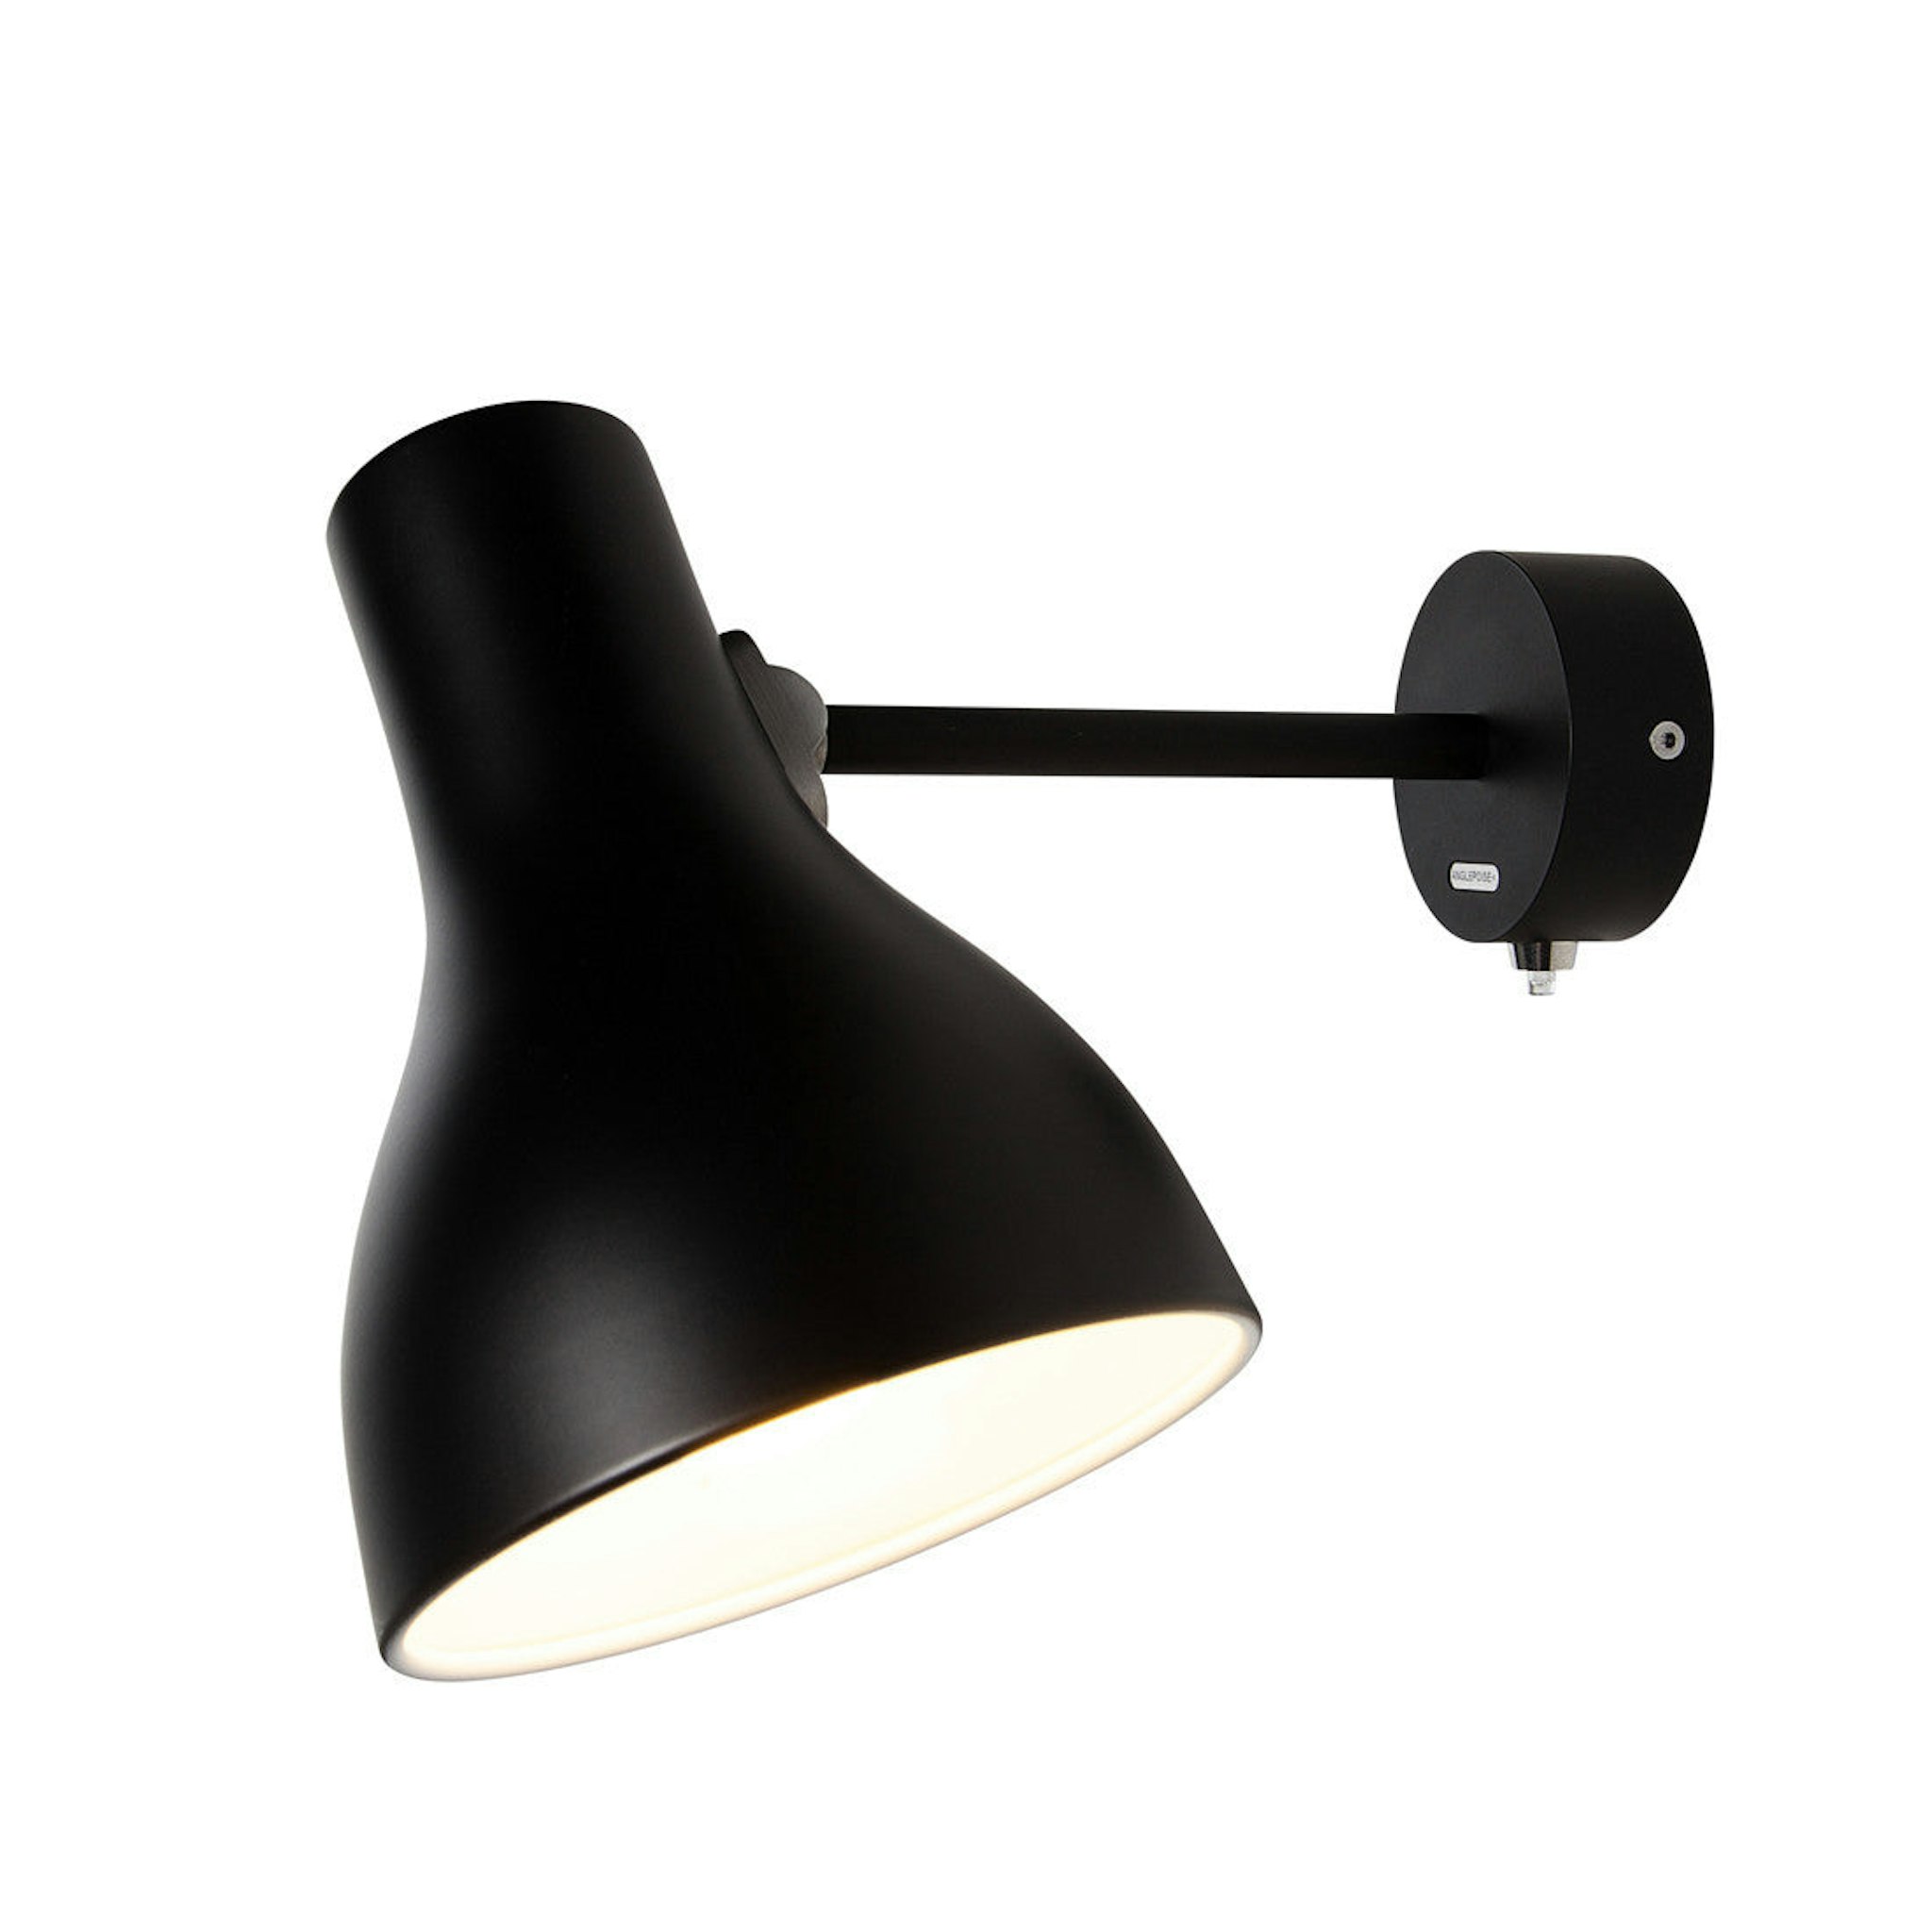 Type 75 Wall Light by Anglepoise